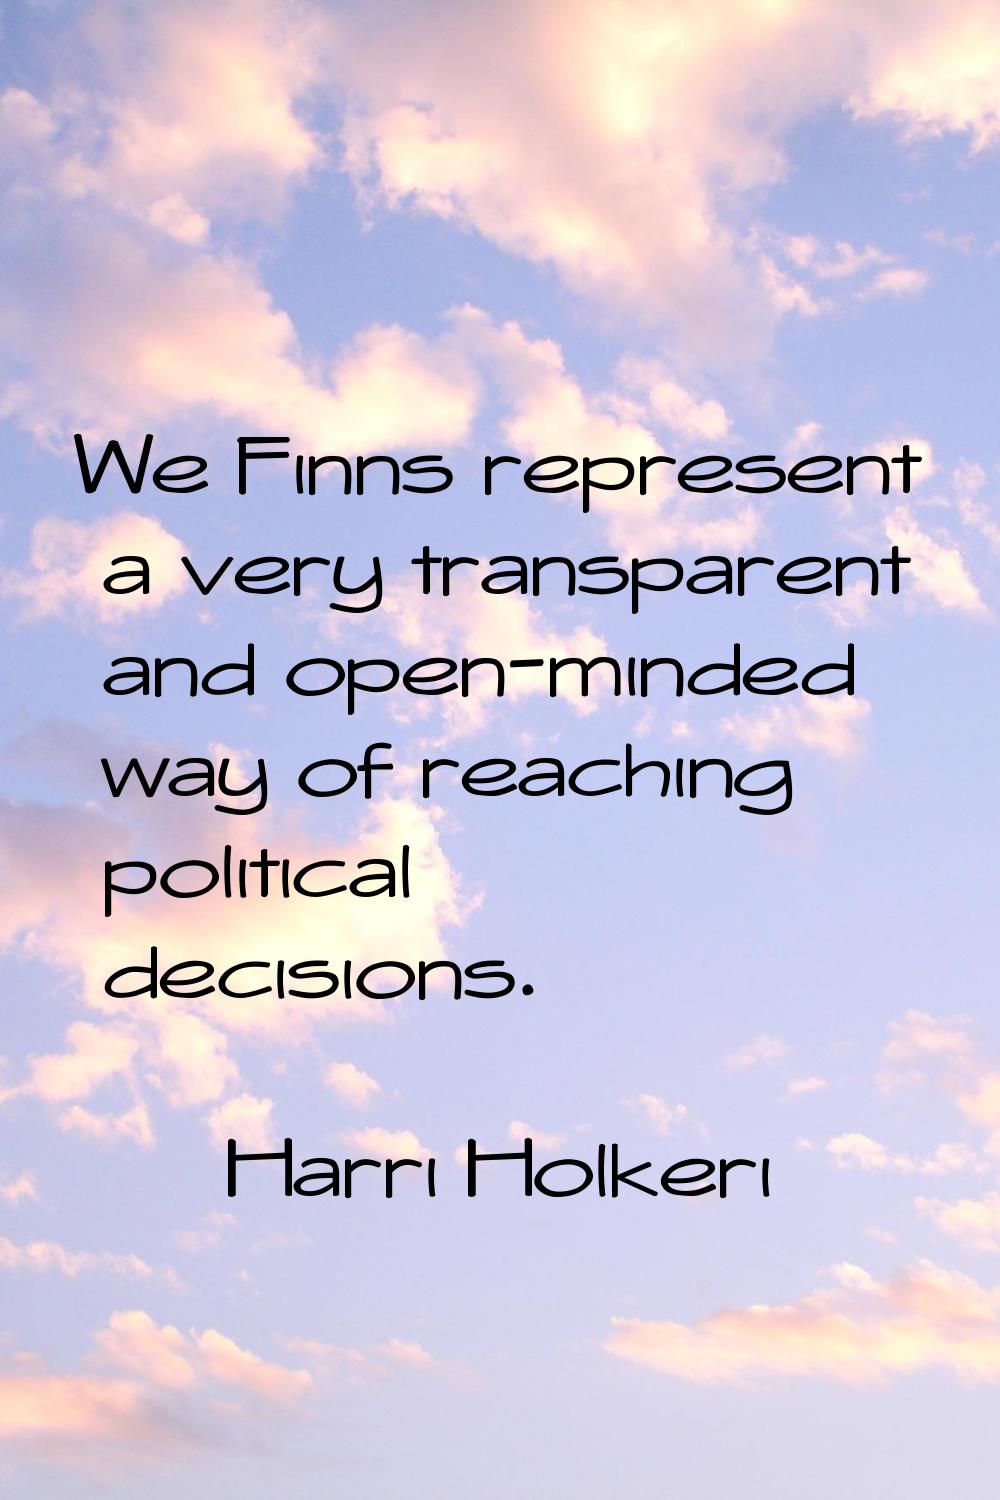 We Finns represent a very transparent and open-minded way of reaching political decisions.